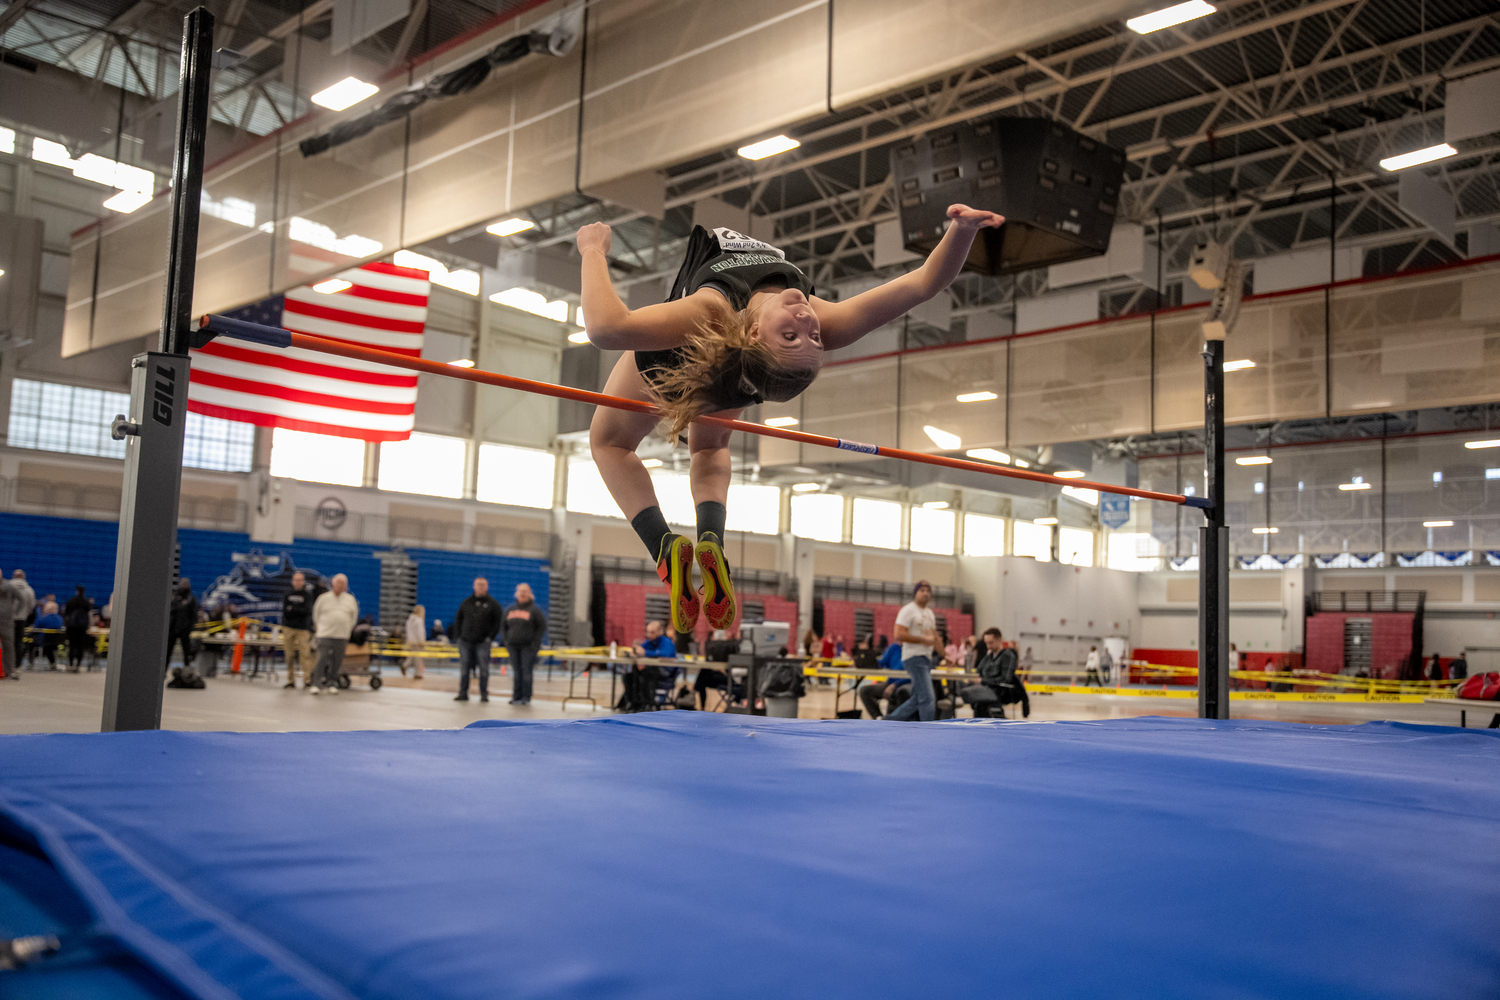 Westhampton Beach senior Madison Phillips scored in each event she competed in on Sunday, including the high jump where she placed sixth.   RON ESPOSITO